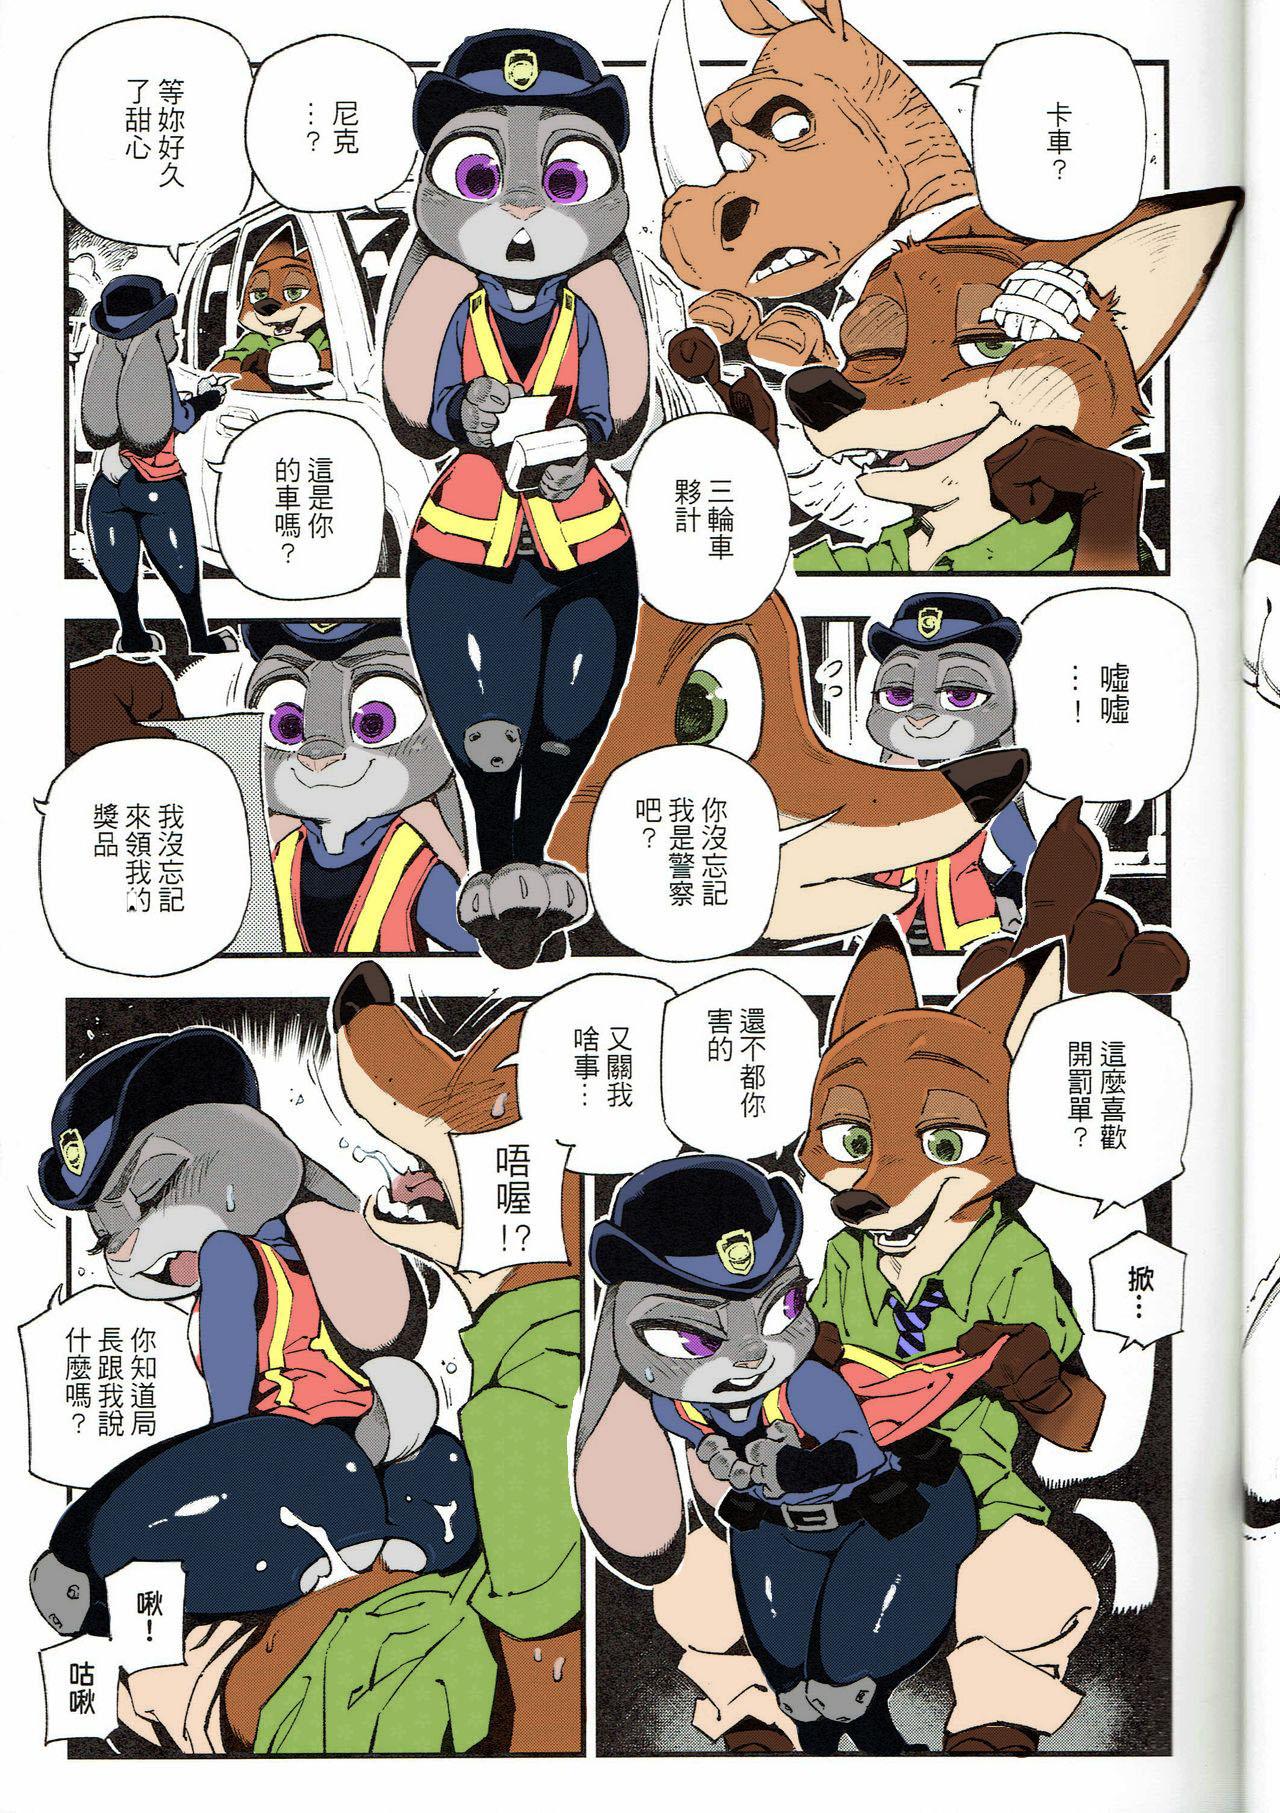 Lesbians What Does The Fox Say? - Zootopia Teenxxx - Page 11